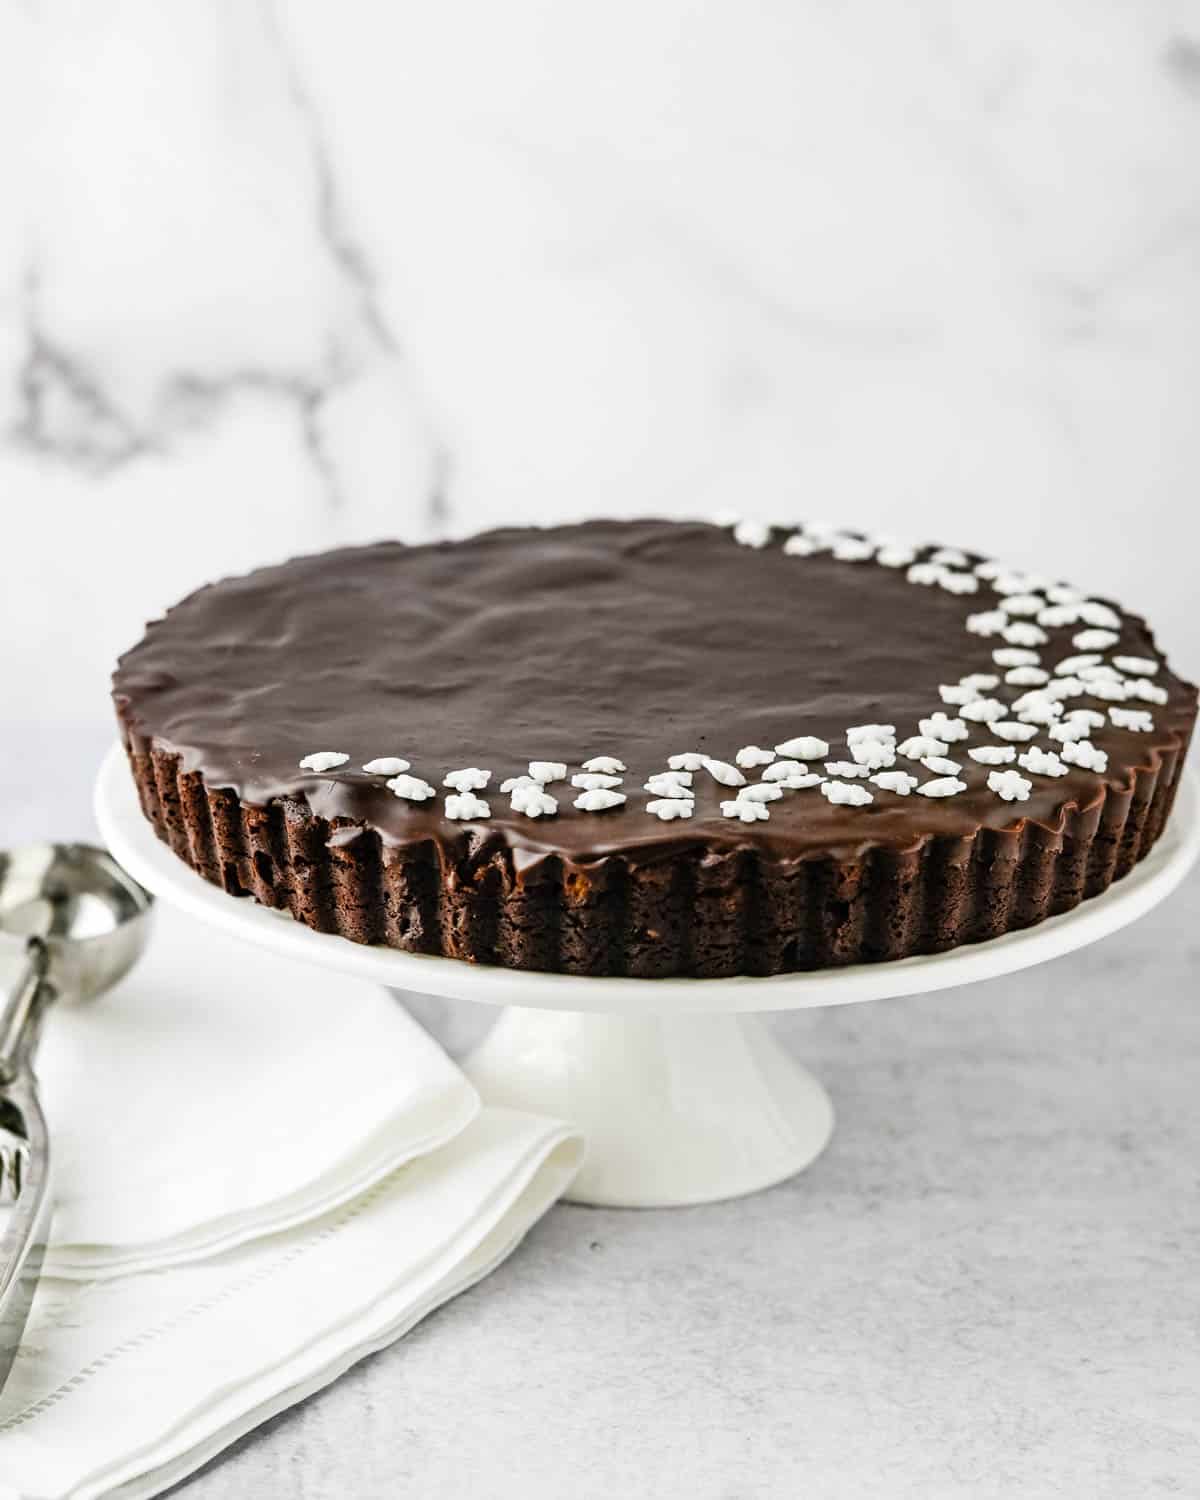 The decorated chocolate fudge tart on a cake plate. 